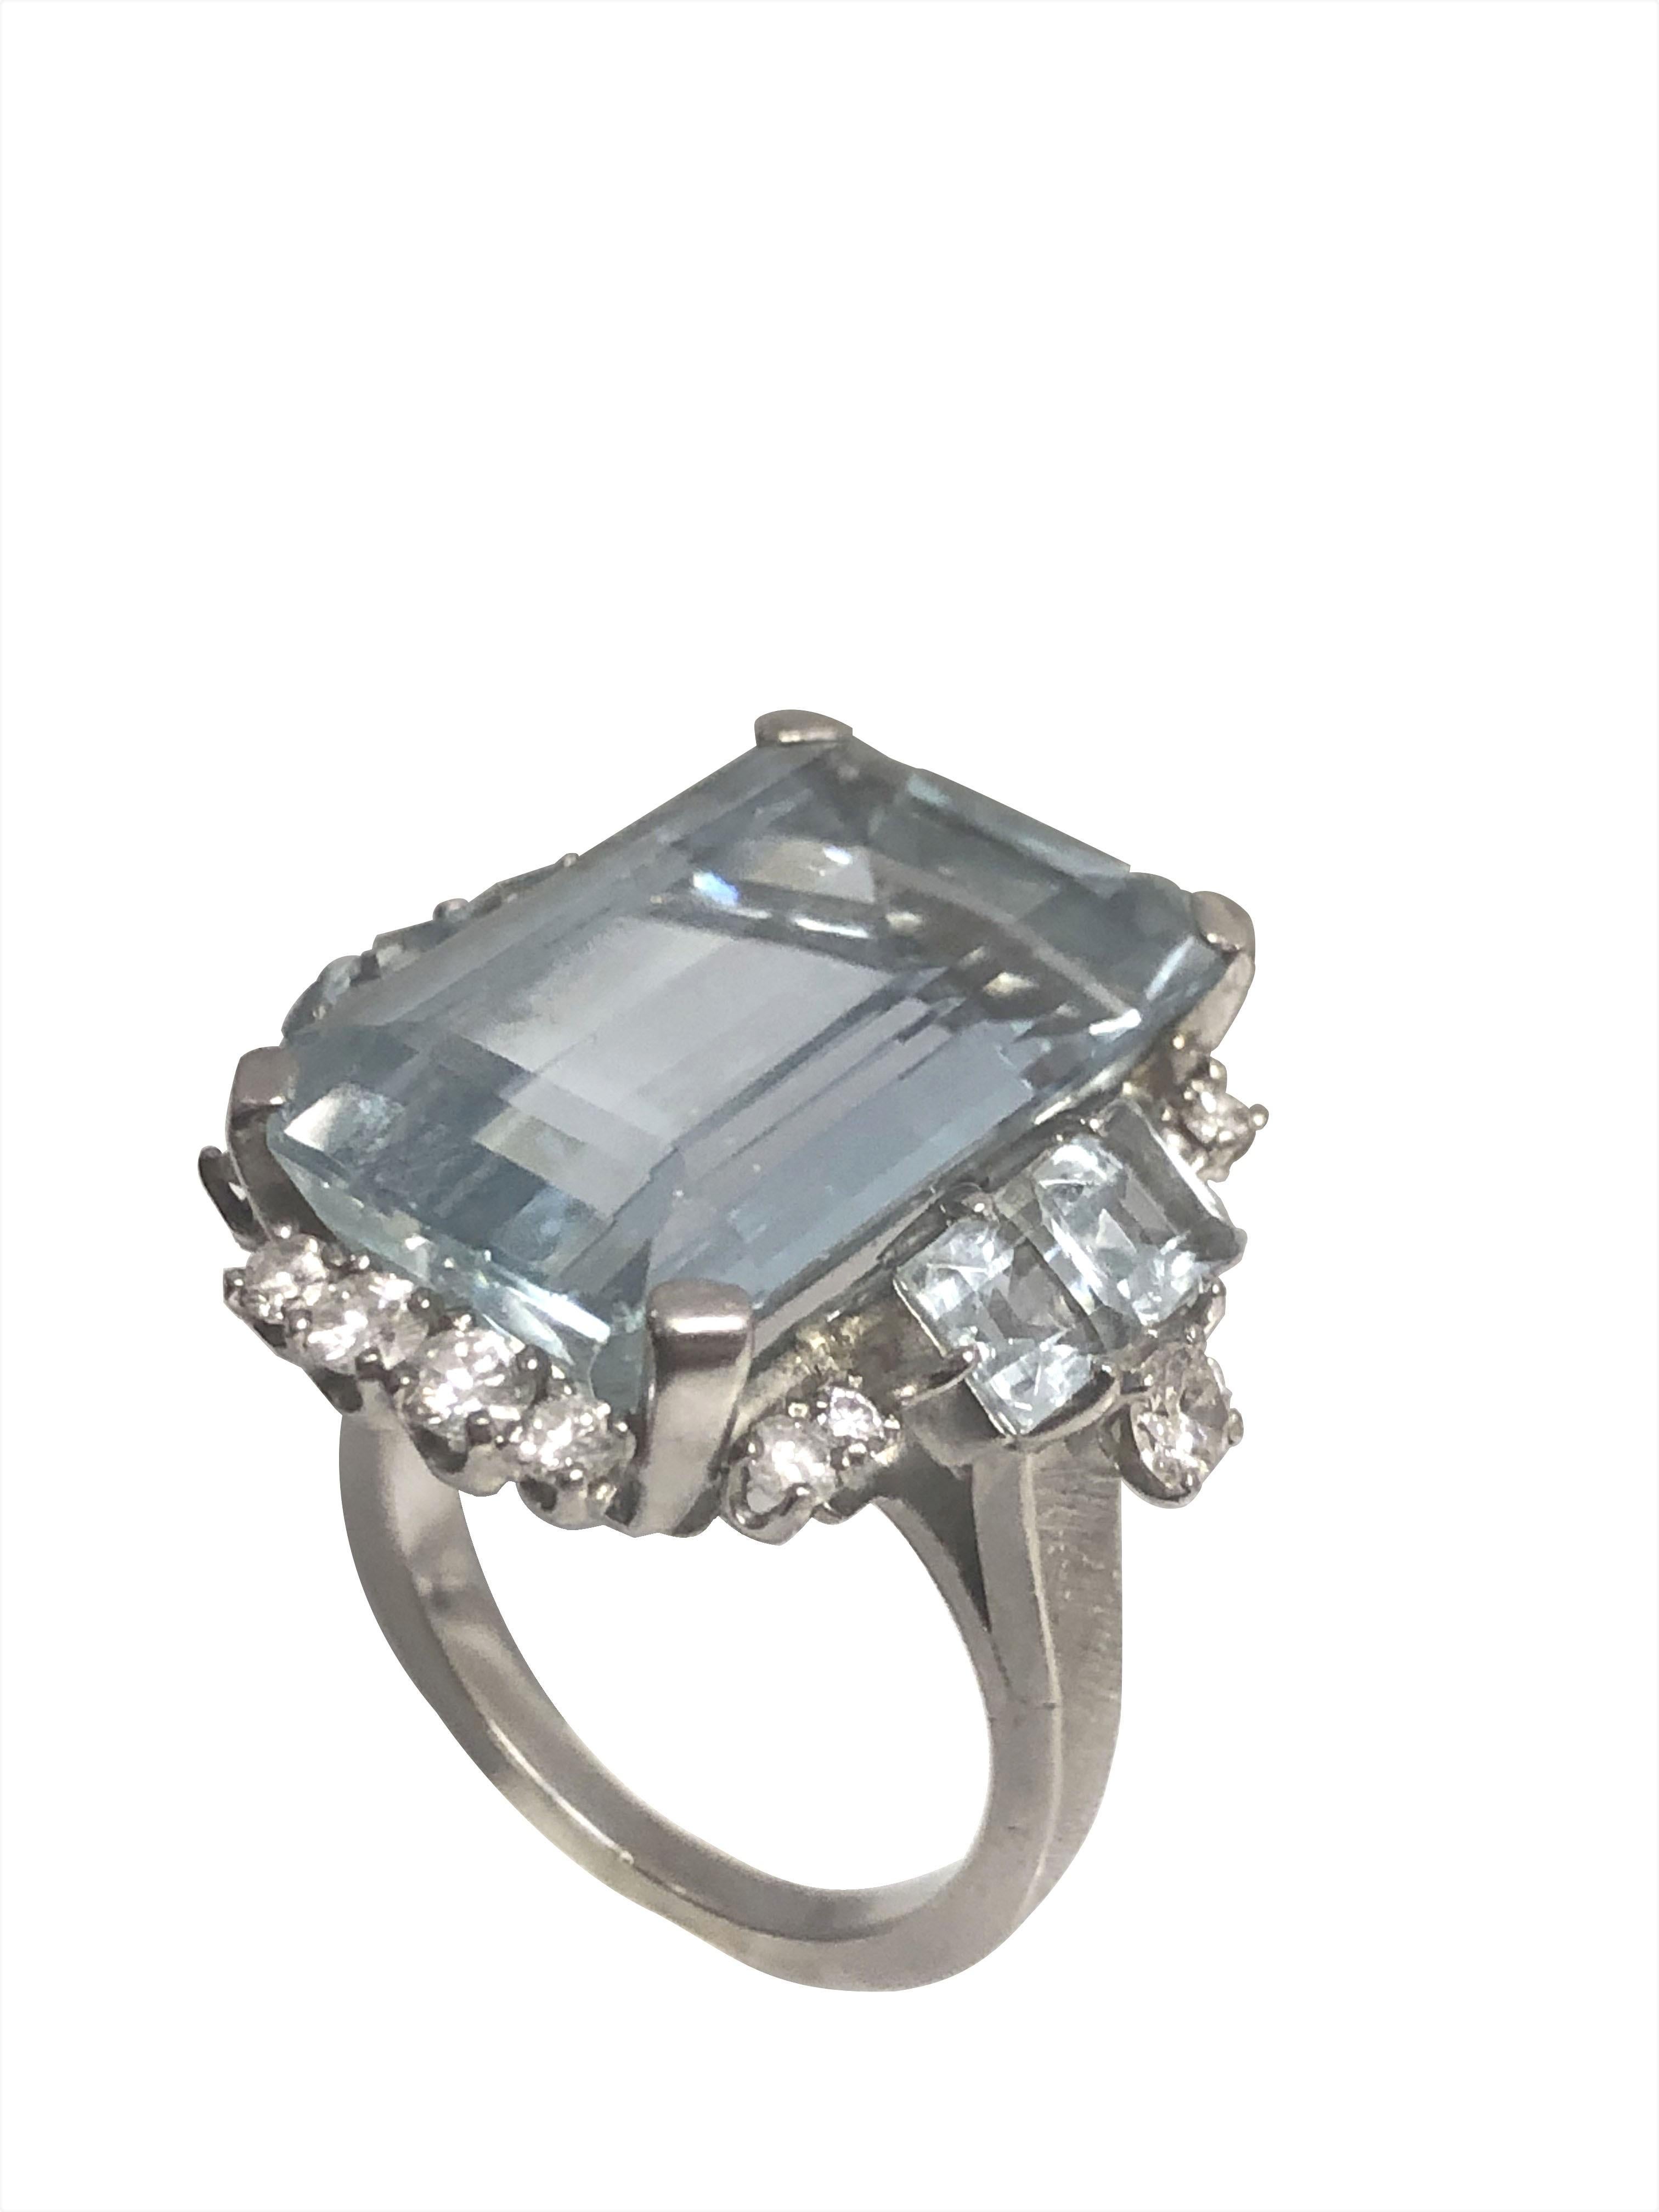 Circa 1940 Platinum Art Deco Ring, centrally set with a Step - Emerald cut Aquamarine of very fine color and measuring 20 x 12 MM approximately 14 Carats, the sides of the ring are set with 4 Square step cut Aquamarines and further set with numerous